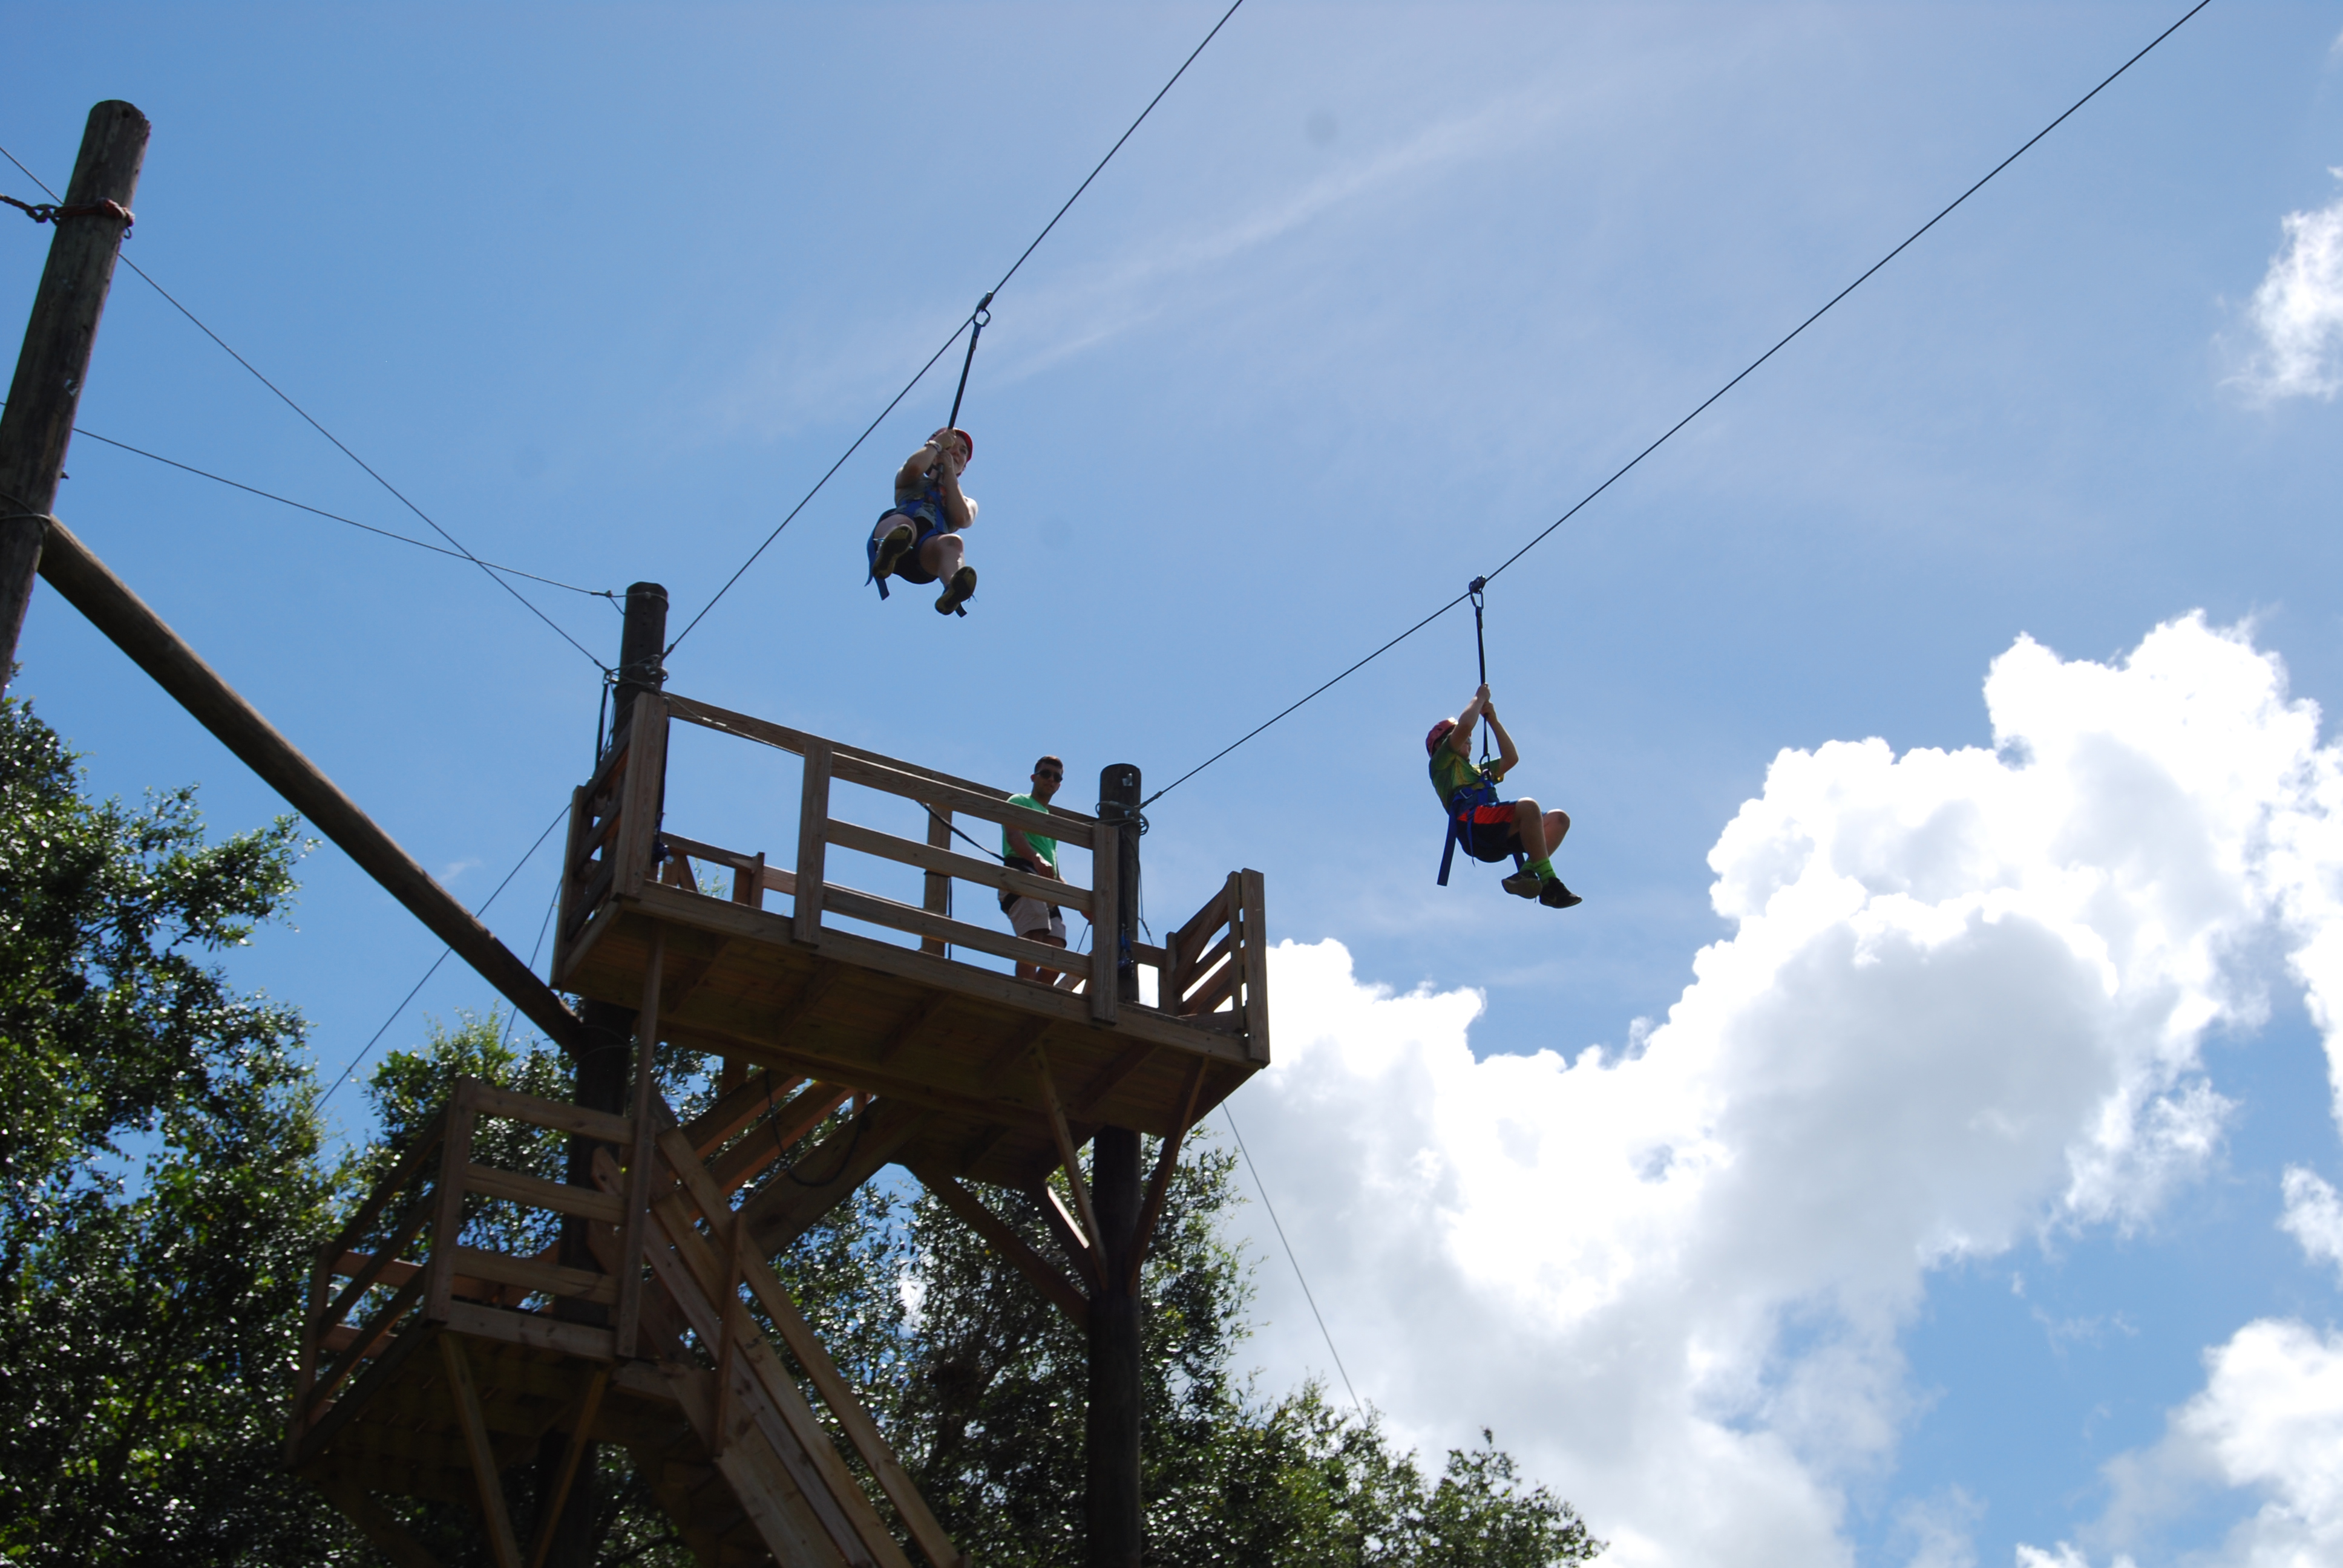 double zip line for two participants to experience together